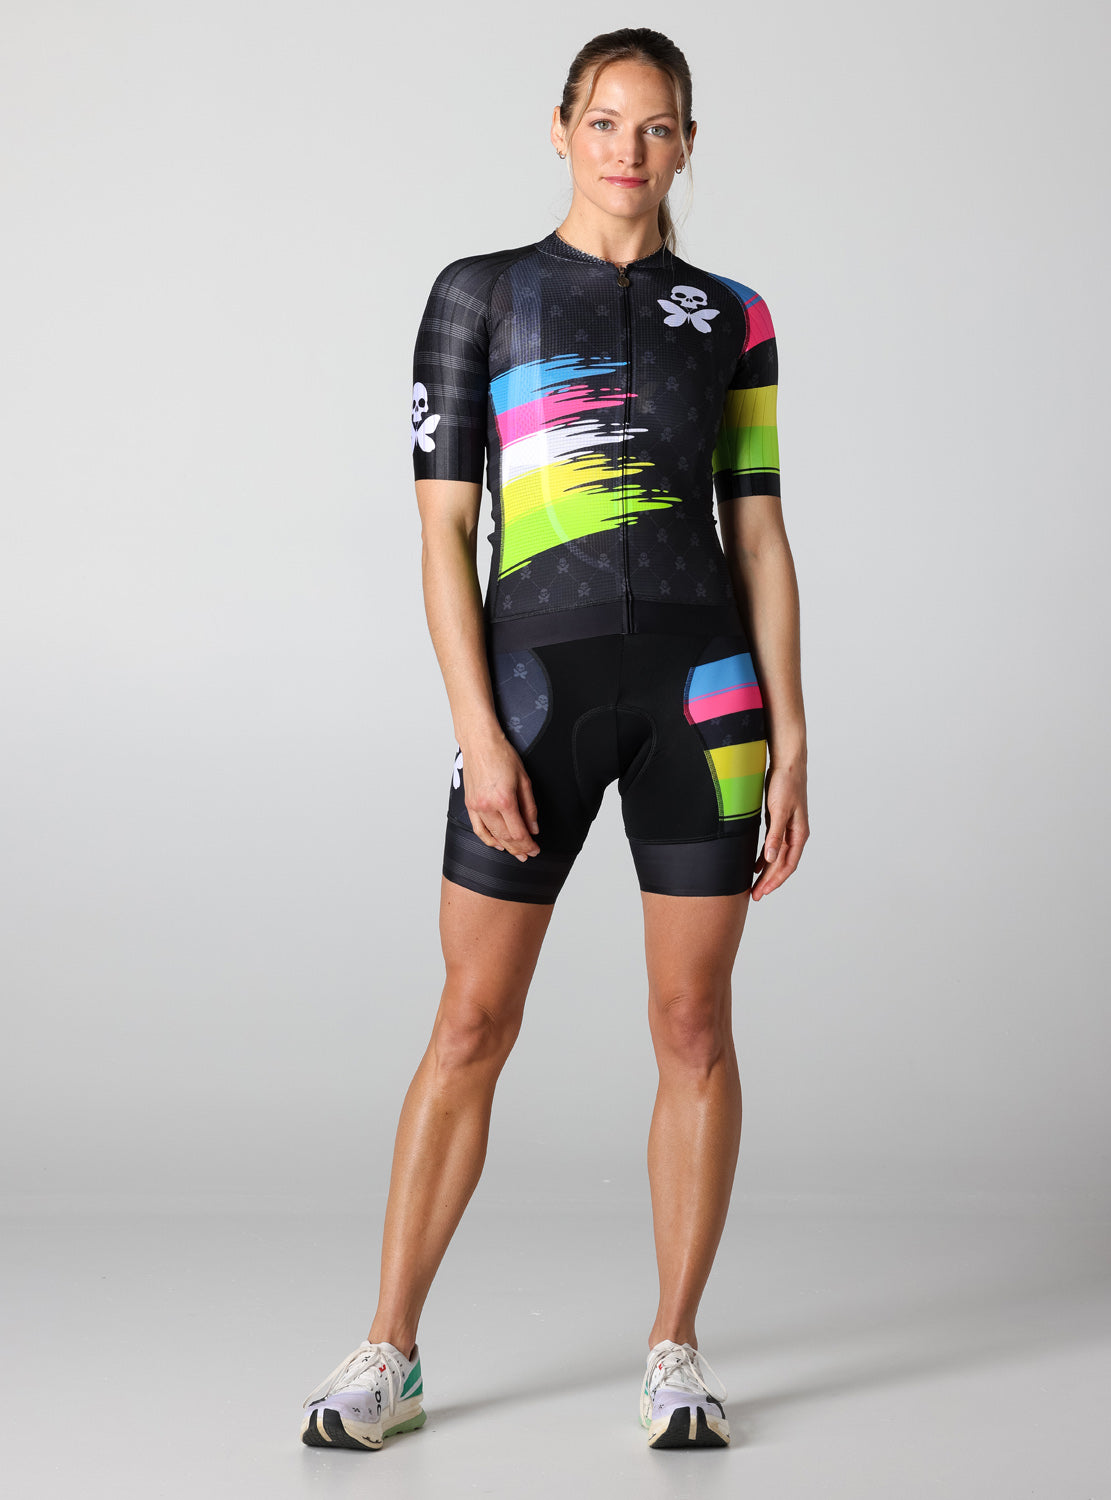 betty designs world champs cycle jersey and shorts for women